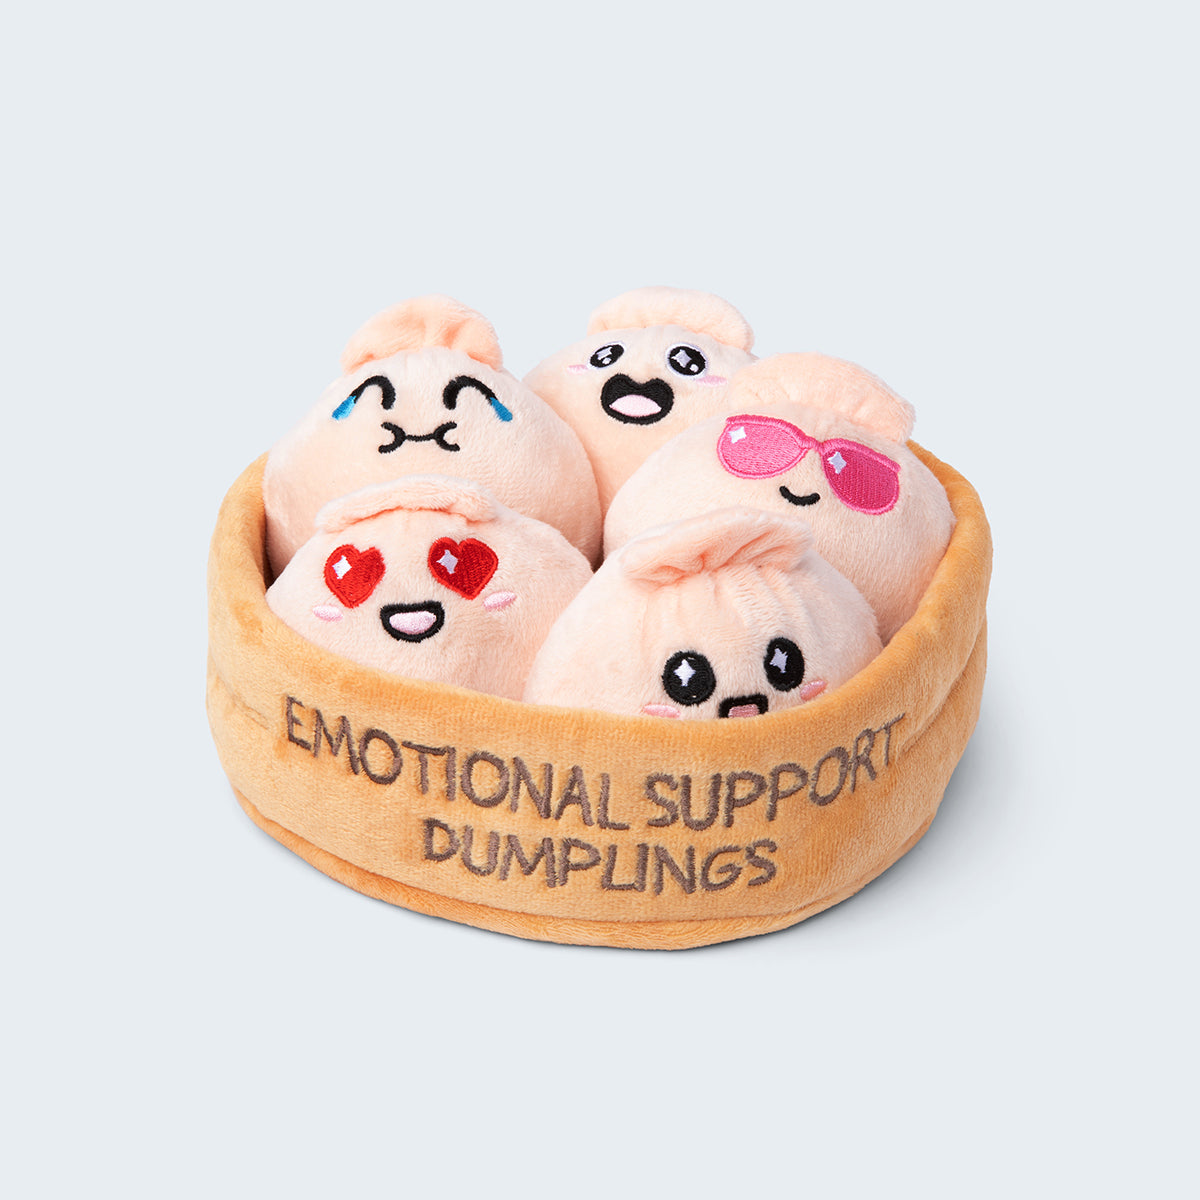 Emotional Support Dumplings: Cuddly Food Plushies – Relatable